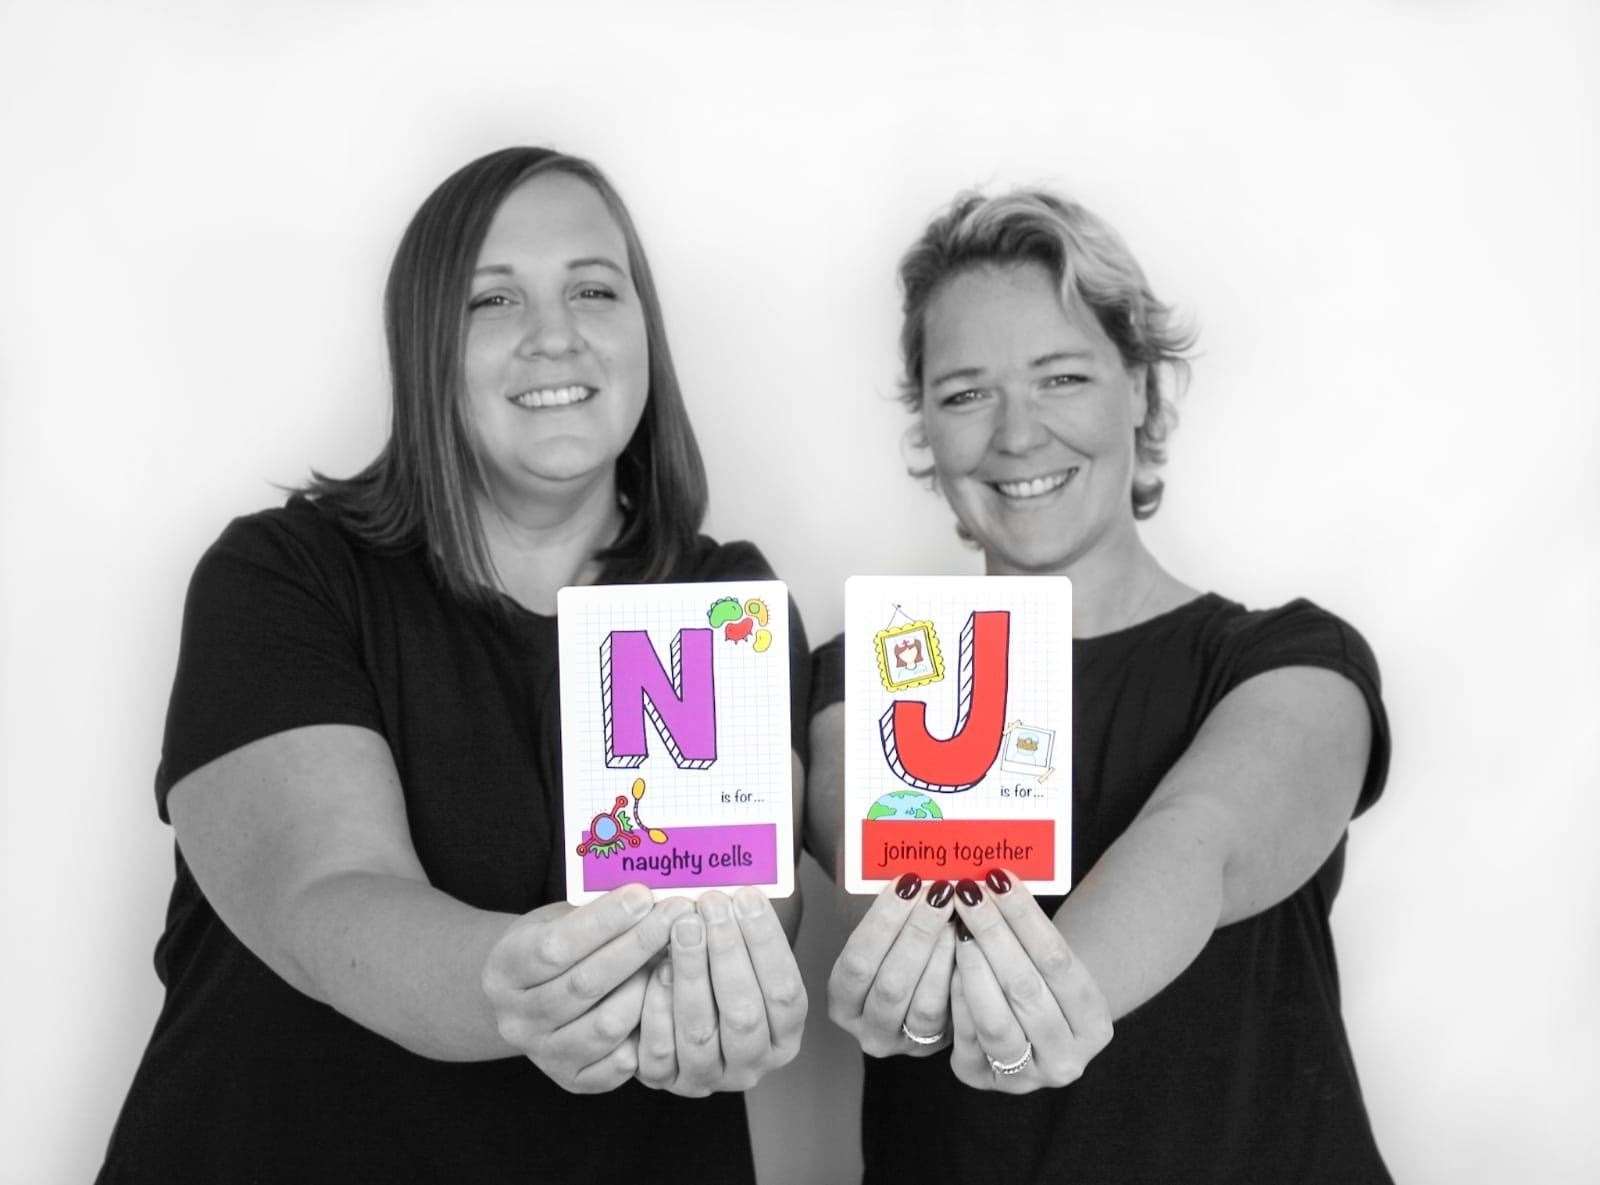 Nic and Jen with their flash cards created in support with Cancer Research UK